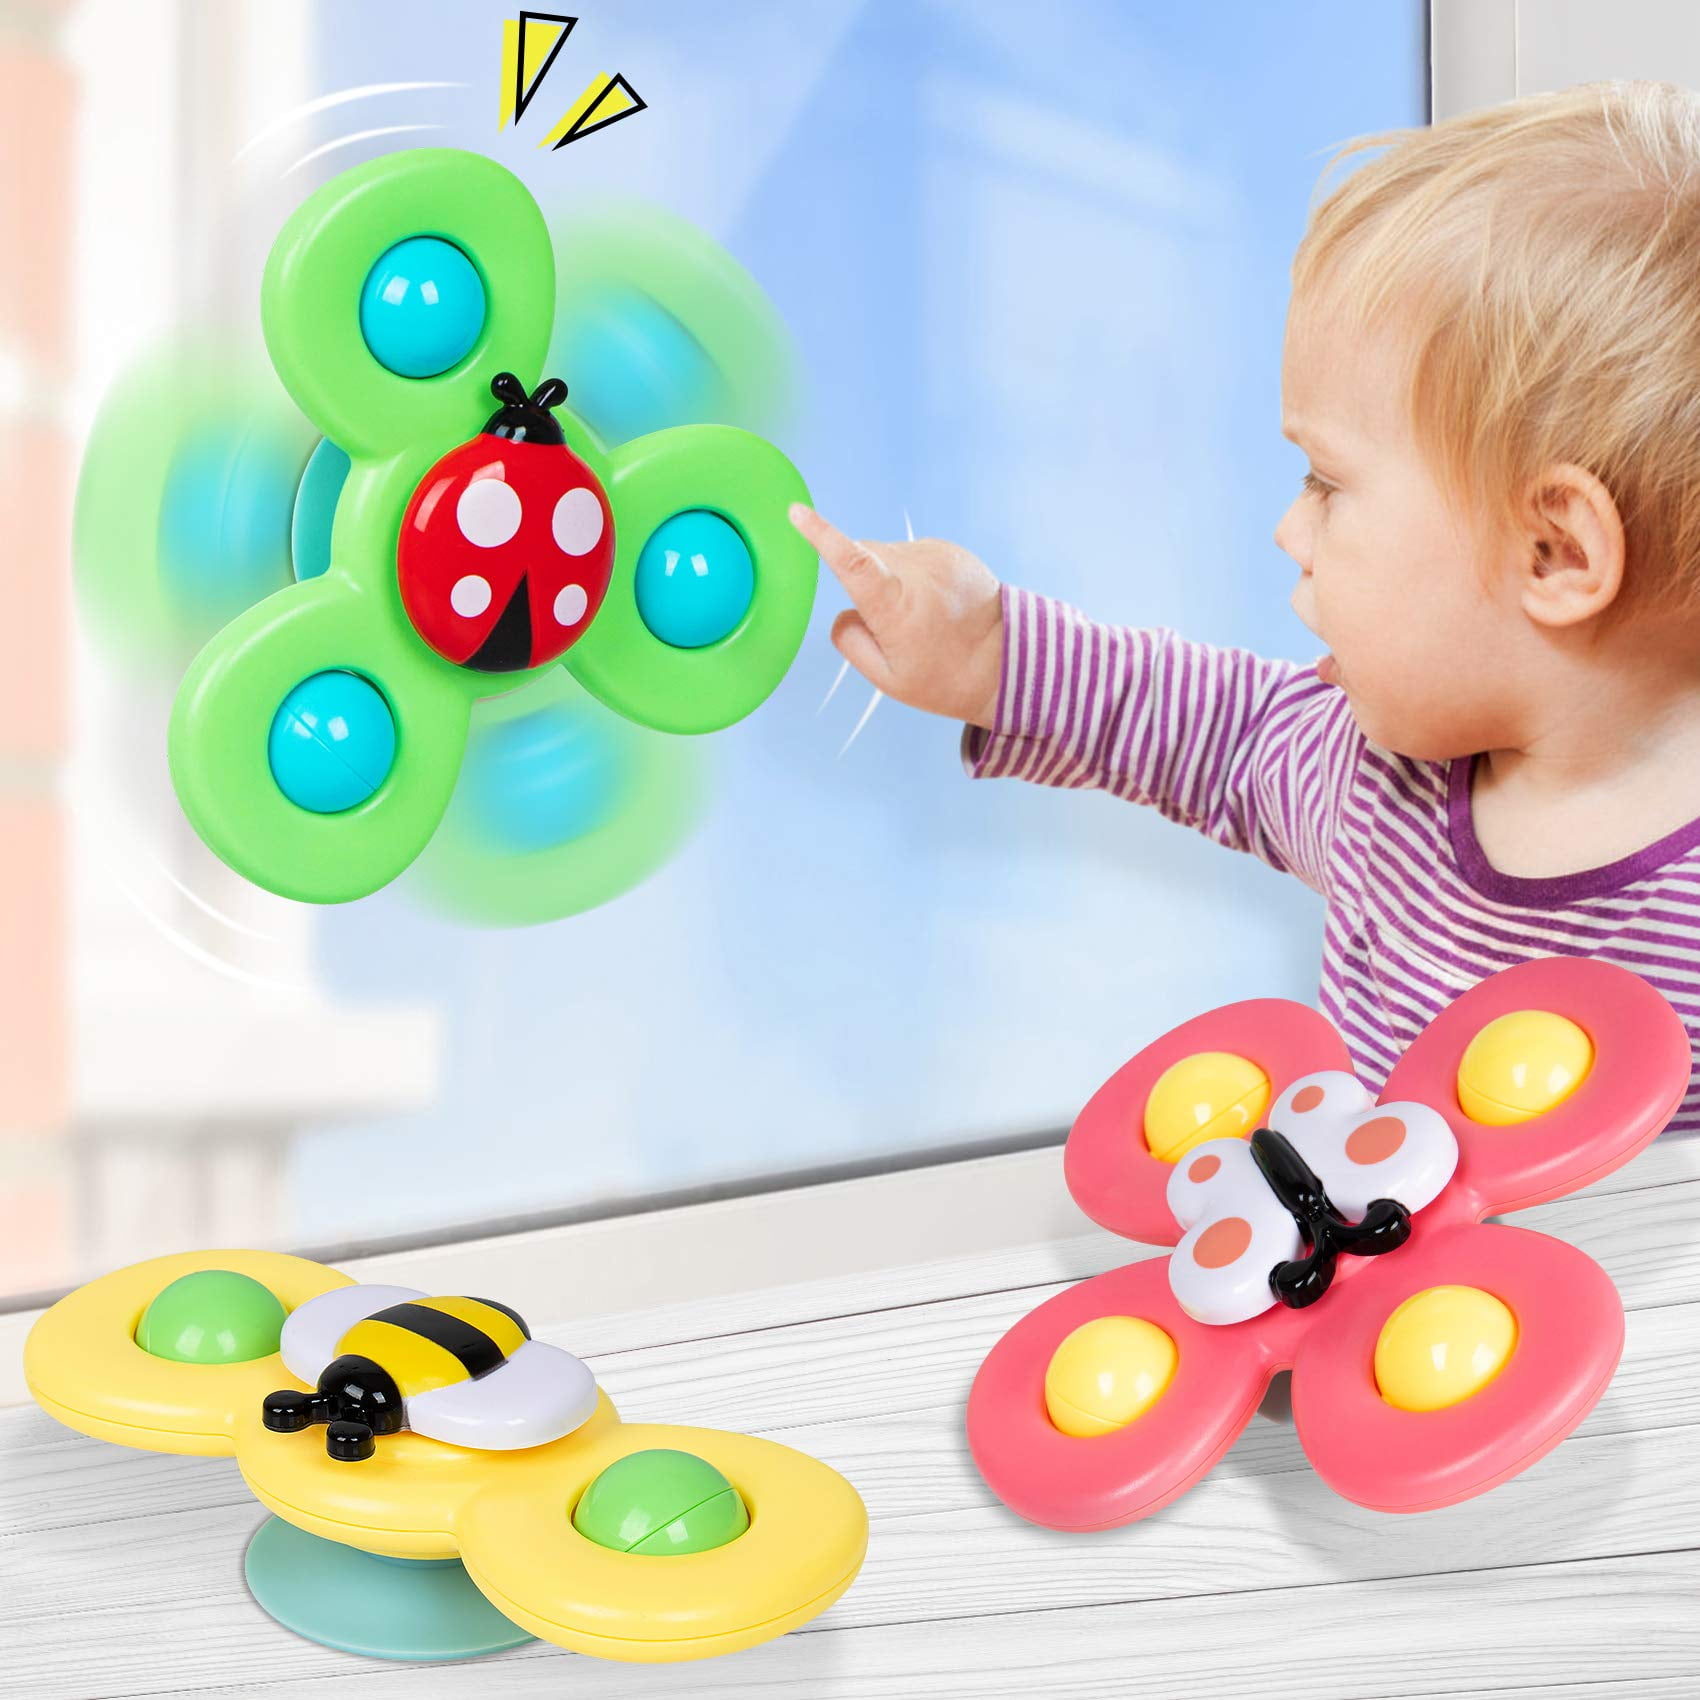 Best Travel Toys: 30+ Toys for Kids from Babies to Teens